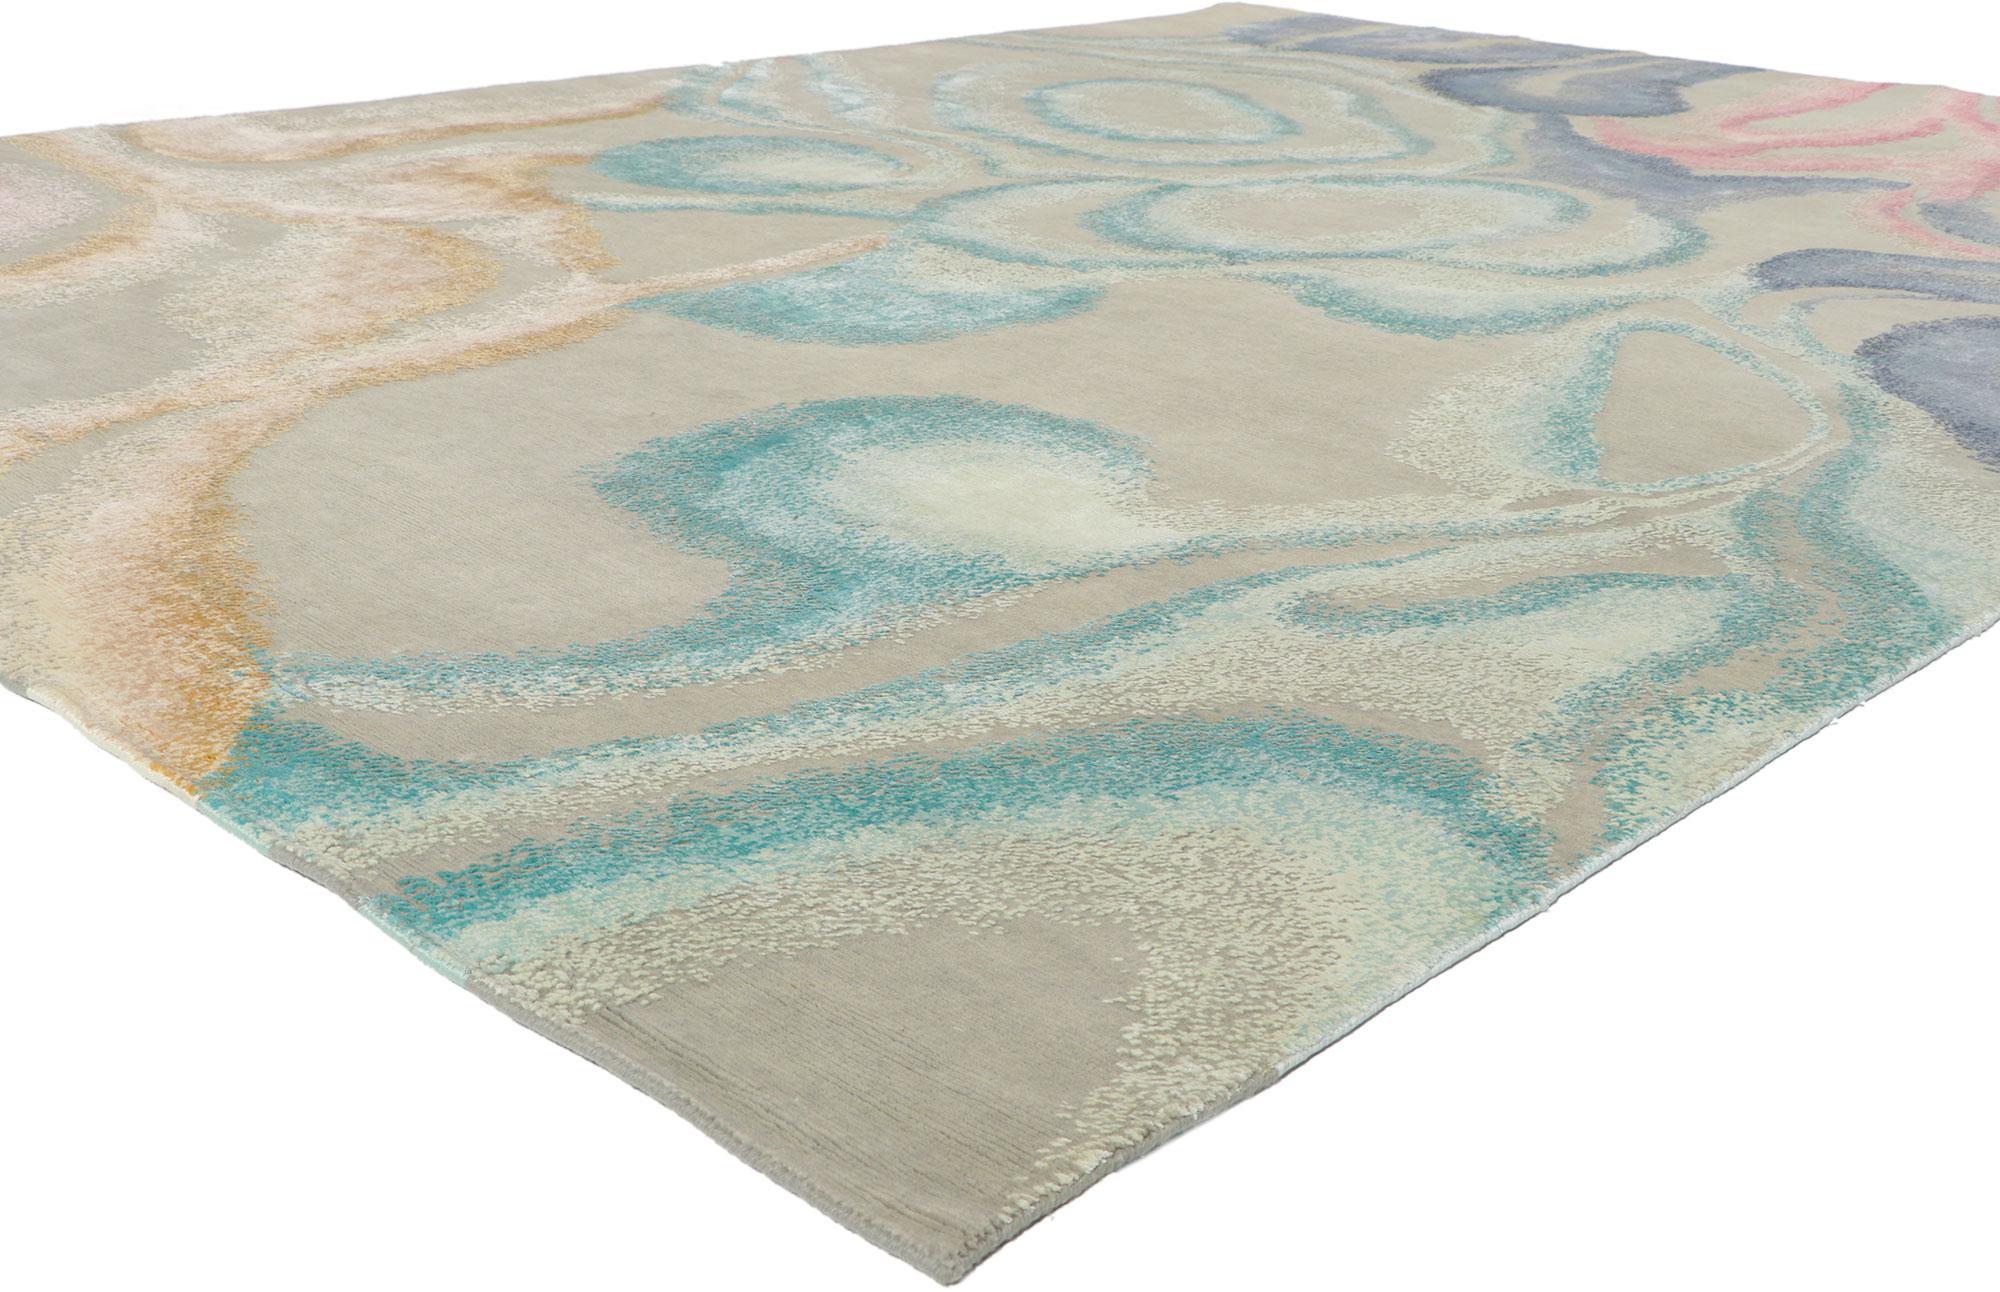 30866 New Contemporary Abstract rug inspired by Georgia O'Keeffe, 08'11 x 11'10. Showcasing a modern style and raised silk design with incredible detail and texture, this hand knotted contemporary textured rug is a captivating vision of woven